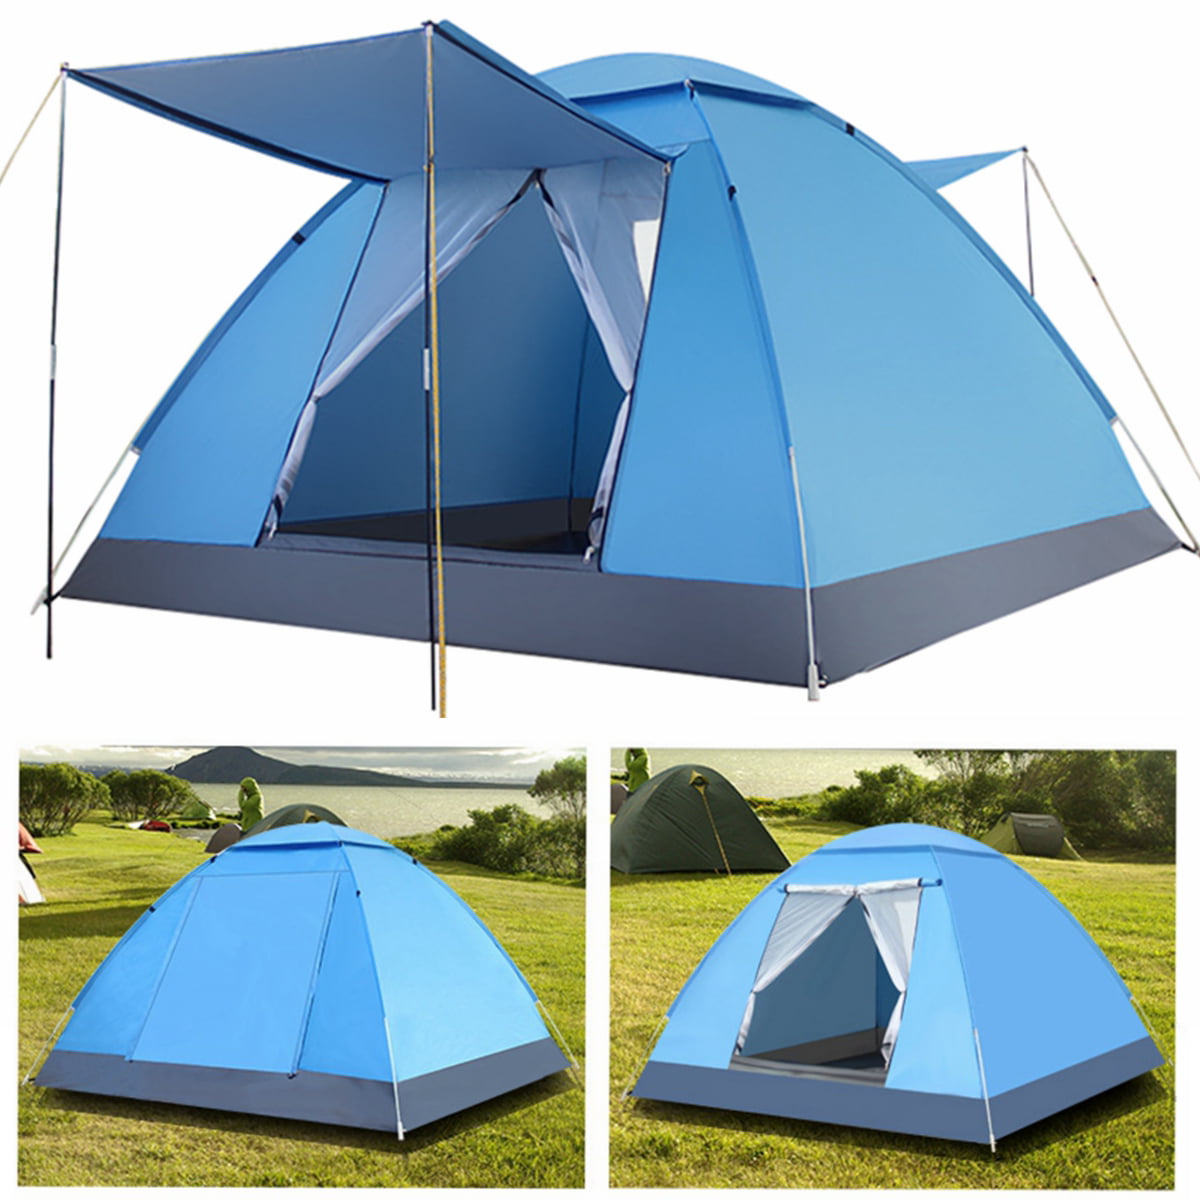 SINGES Camping Tent 2-3 Person Camping Tent Portable Folding Automatic Tent  w/2 Mosquito Net Doors Carrying Bag for Hiking Climbing Adventure Fishing